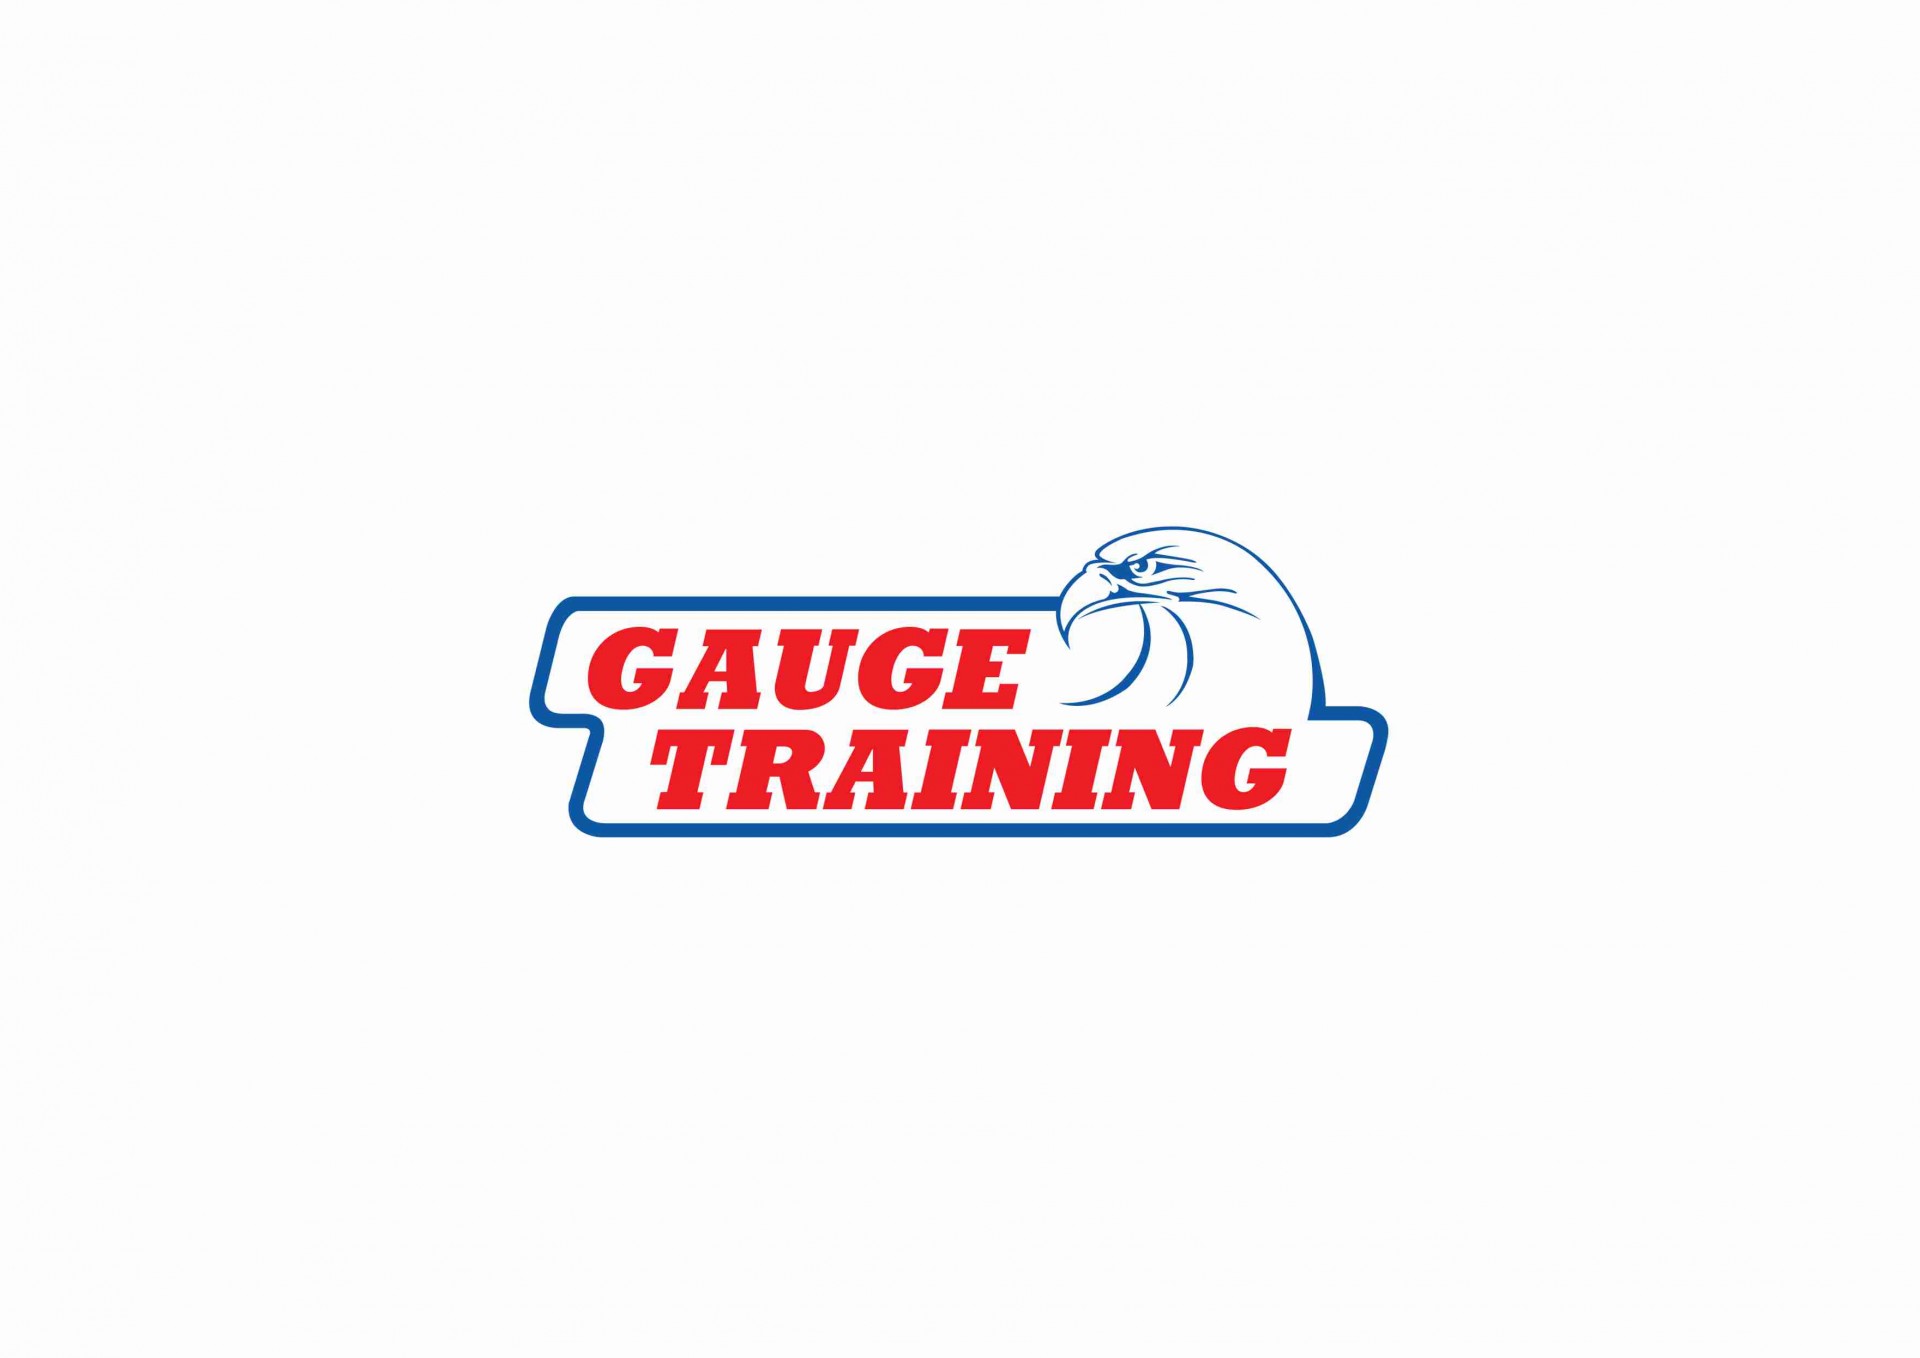 Our Partnership with "Gauge Training Inc."!